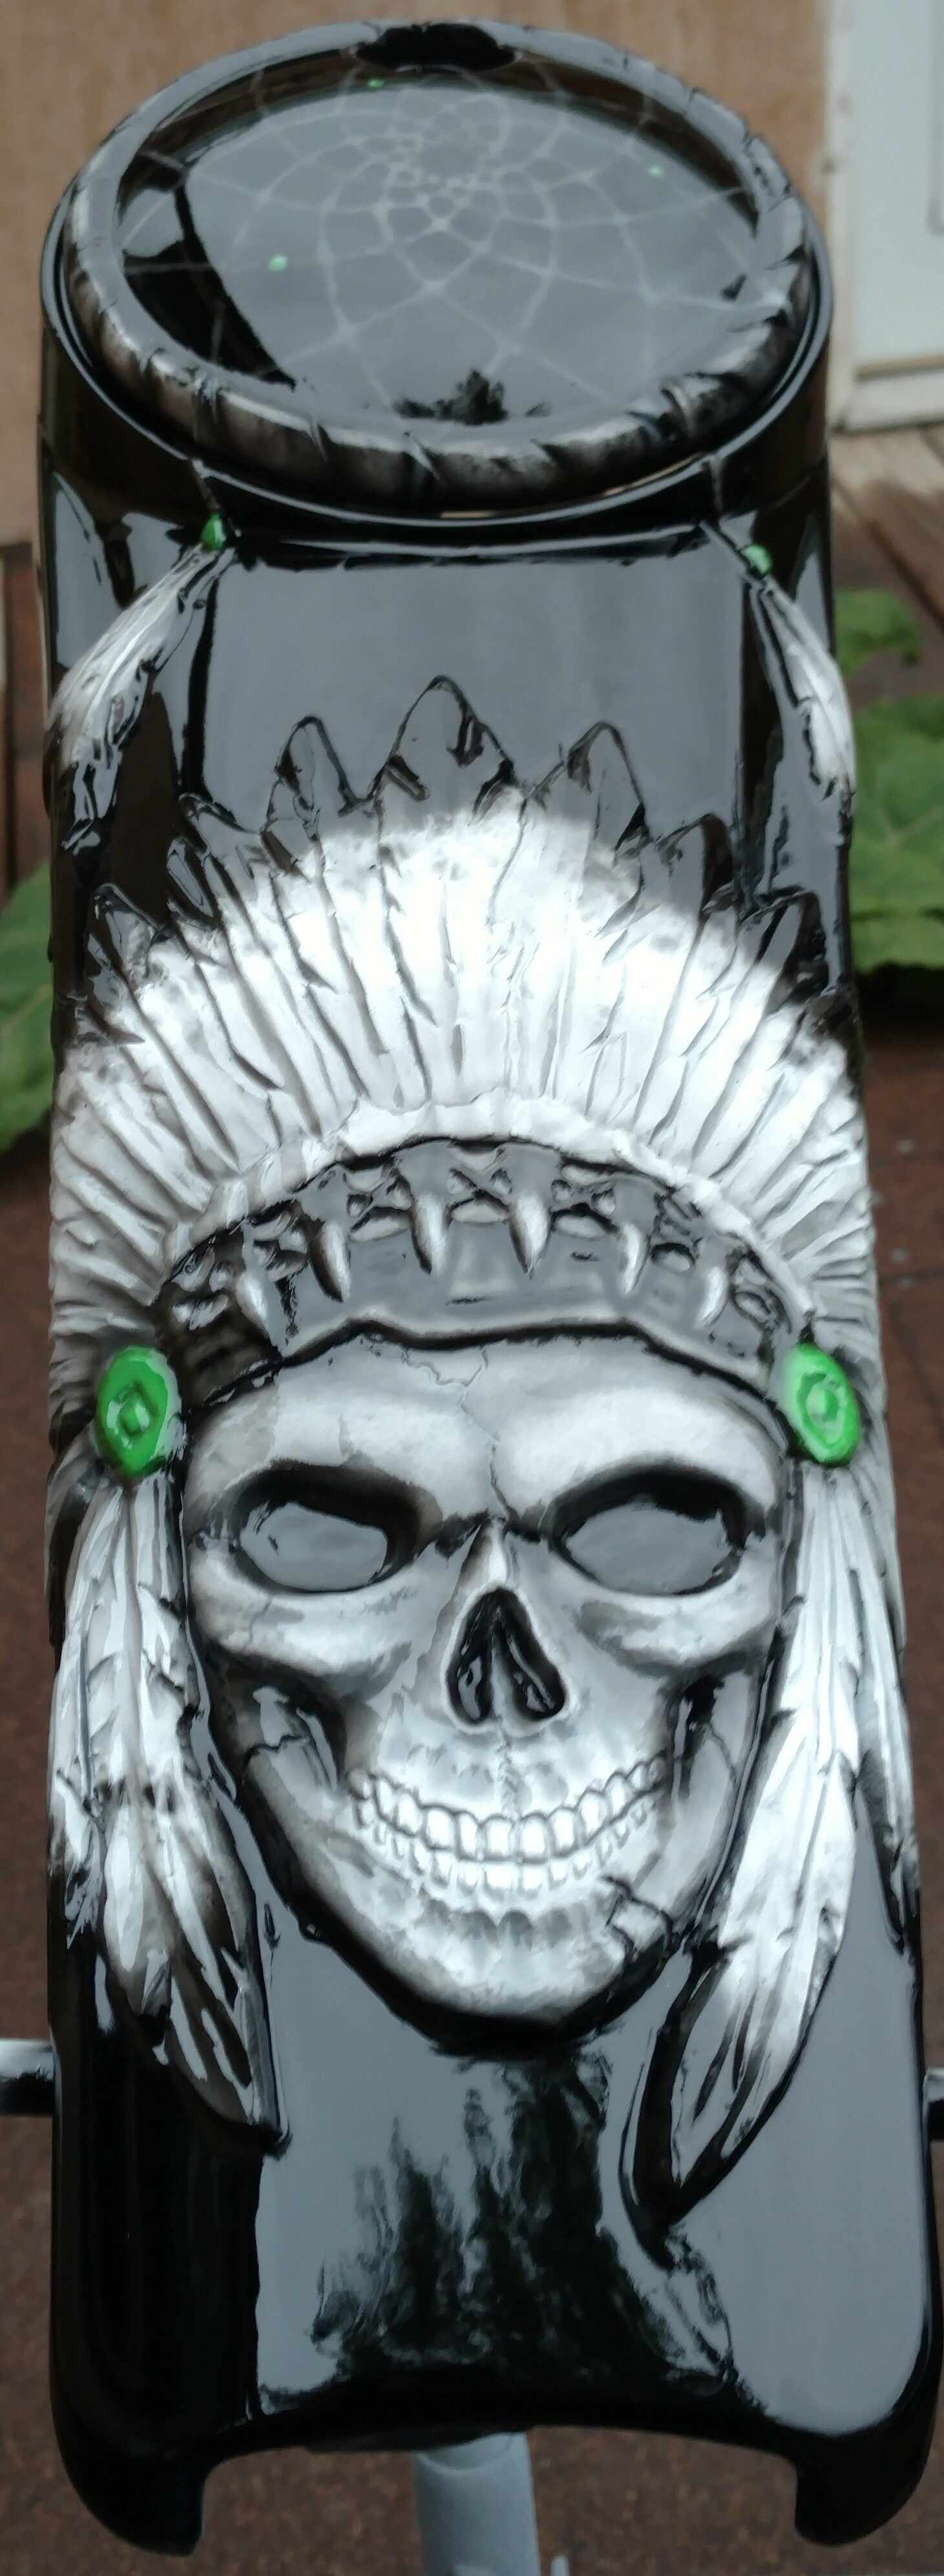 Harley Motorcycle Harley Indian Warbonnet Console